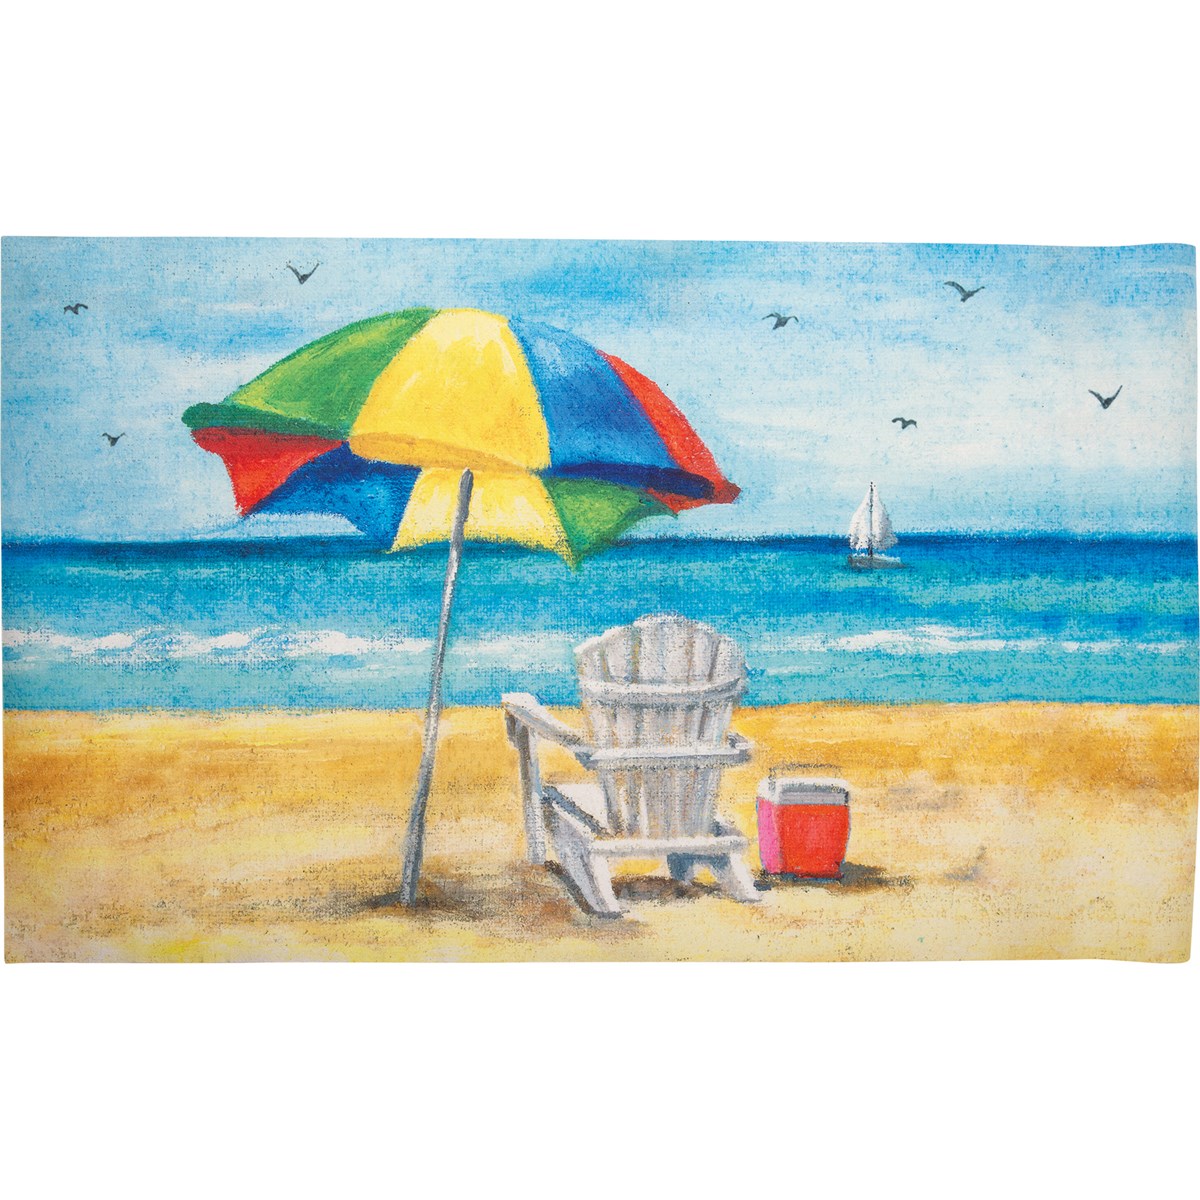 Beach Chair Rug - Polyester, PVC skid-resistant backing